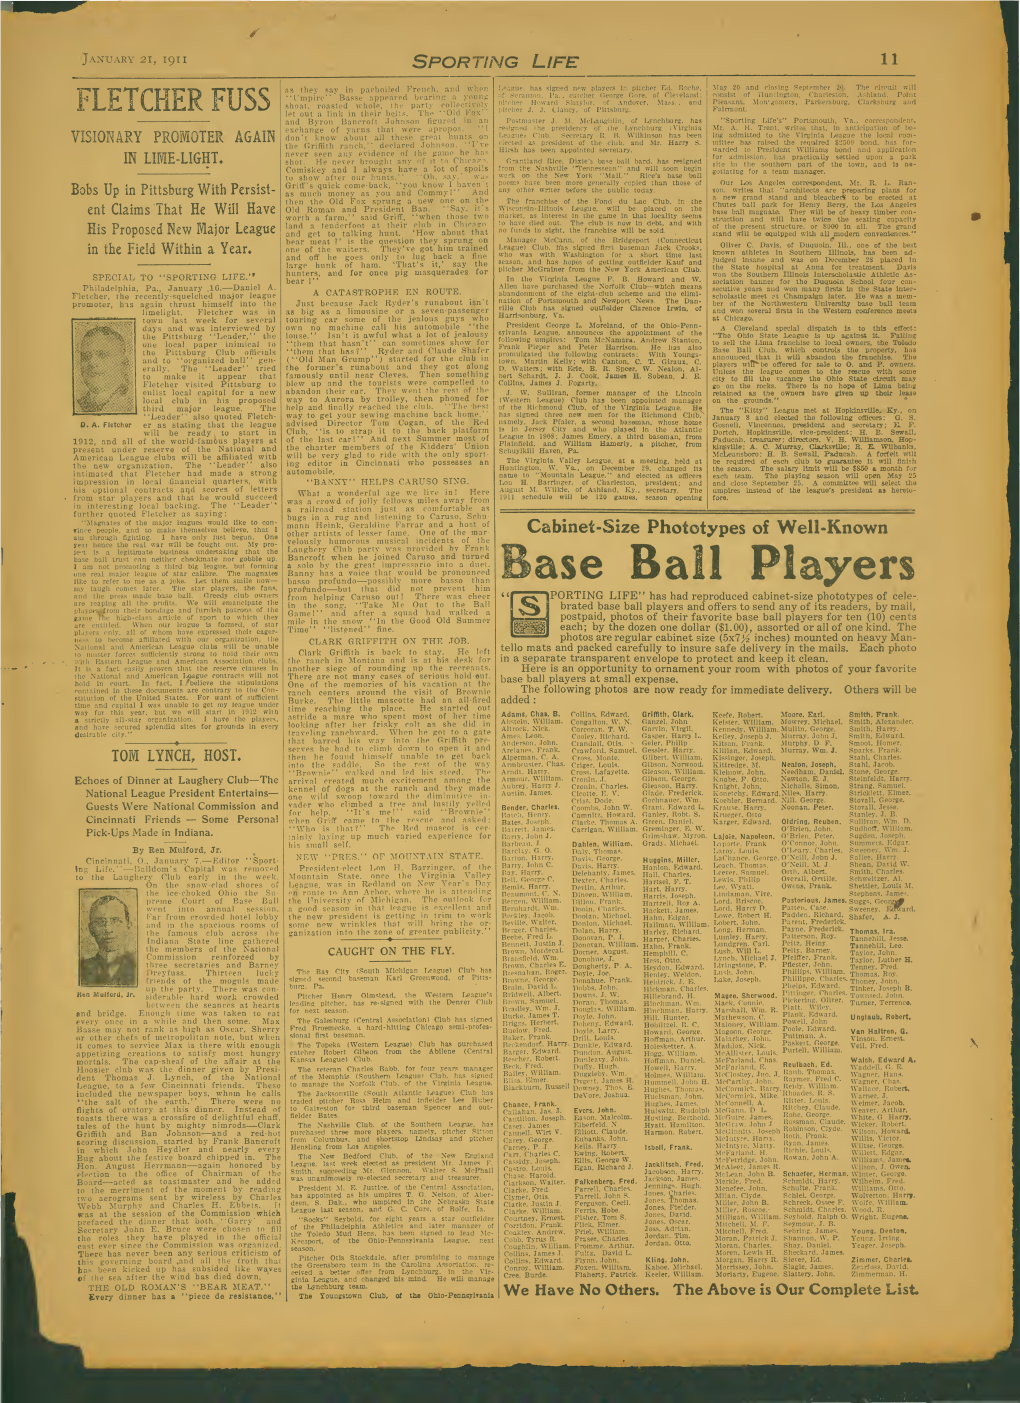 Cabinet-Size Phototypes of Well-Known Base Ball Players